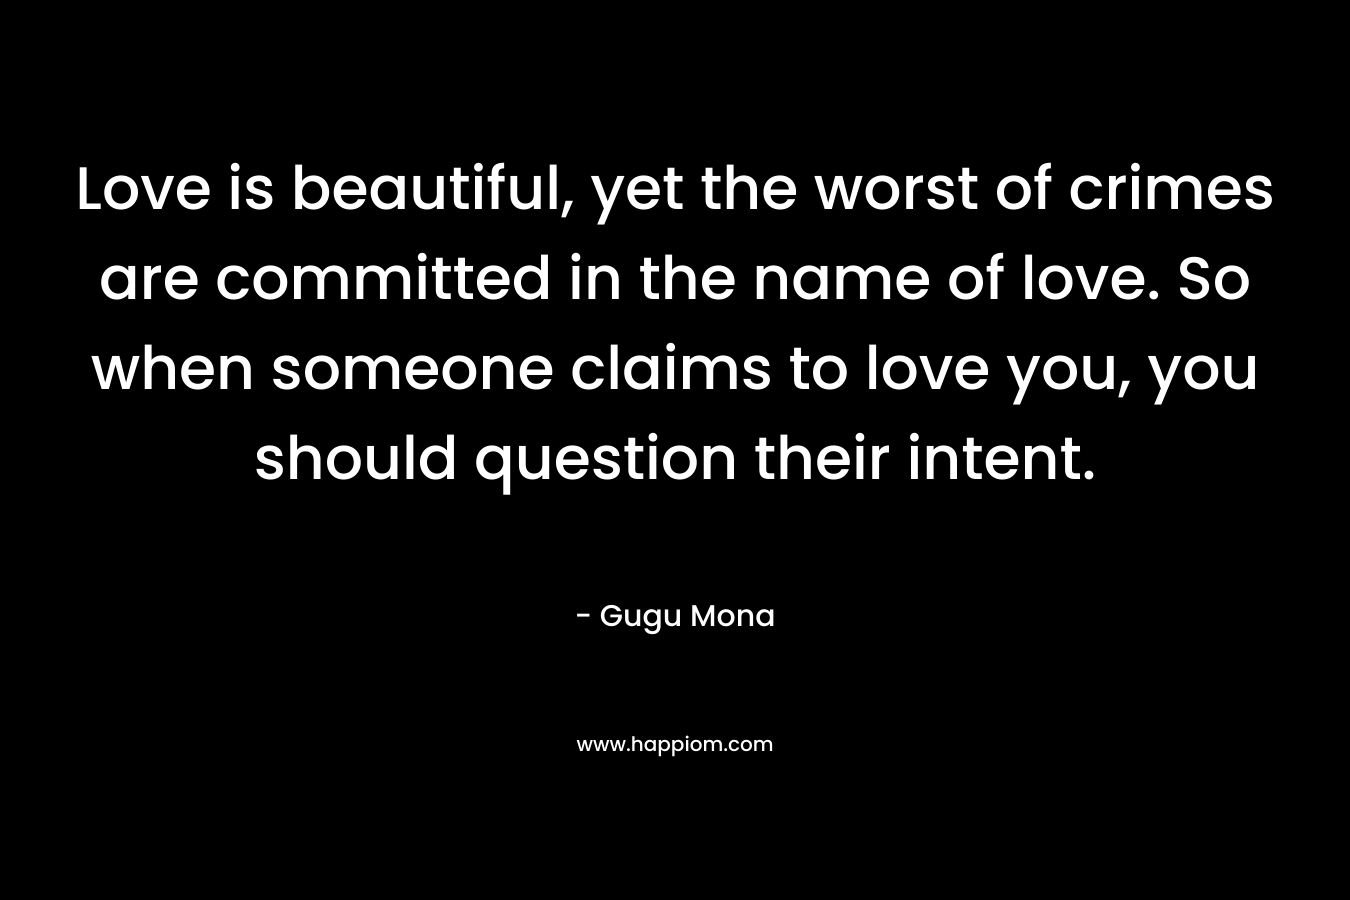 Love is beautiful, yet the worst of crimes are committed in the name of love. So when someone claims to love you, you should question their intent.